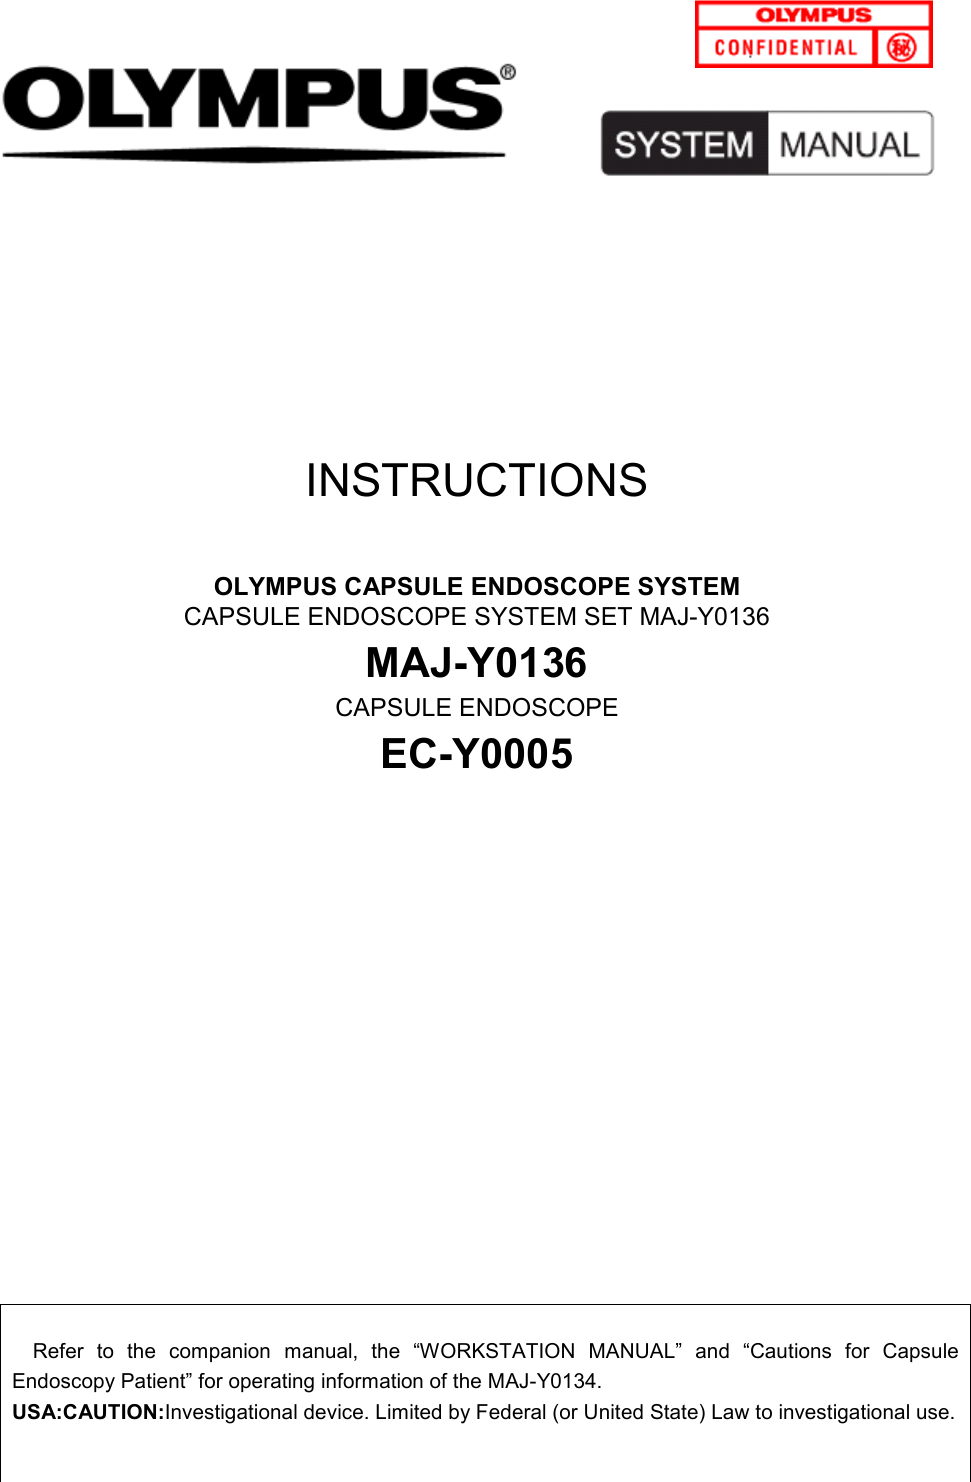 OLYMPUS CAPSULE ENDOSCOPE SYSTEM SYSTEM MANUAL                                   1            INSTRUCTIONS  OLYMPUS CAPSULE ENDOSCOPE SYSTEM CAPSULE ENDOSCOPE SYSTEM SET MAJ-Y0136 MAJ-Y0136 CAPSULE ENDOSCOPE   EC-Y0005               Refer  to  the  companion  manual,  the  “WORKSTATION  MANUAL”  and  “Cautions  for  Capsule Endoscopy Patient” for operating information of the MAJ-Y0134. USA:CAUTION:Investigational device. Limited by Federal (or United State) Law to investigational use.   